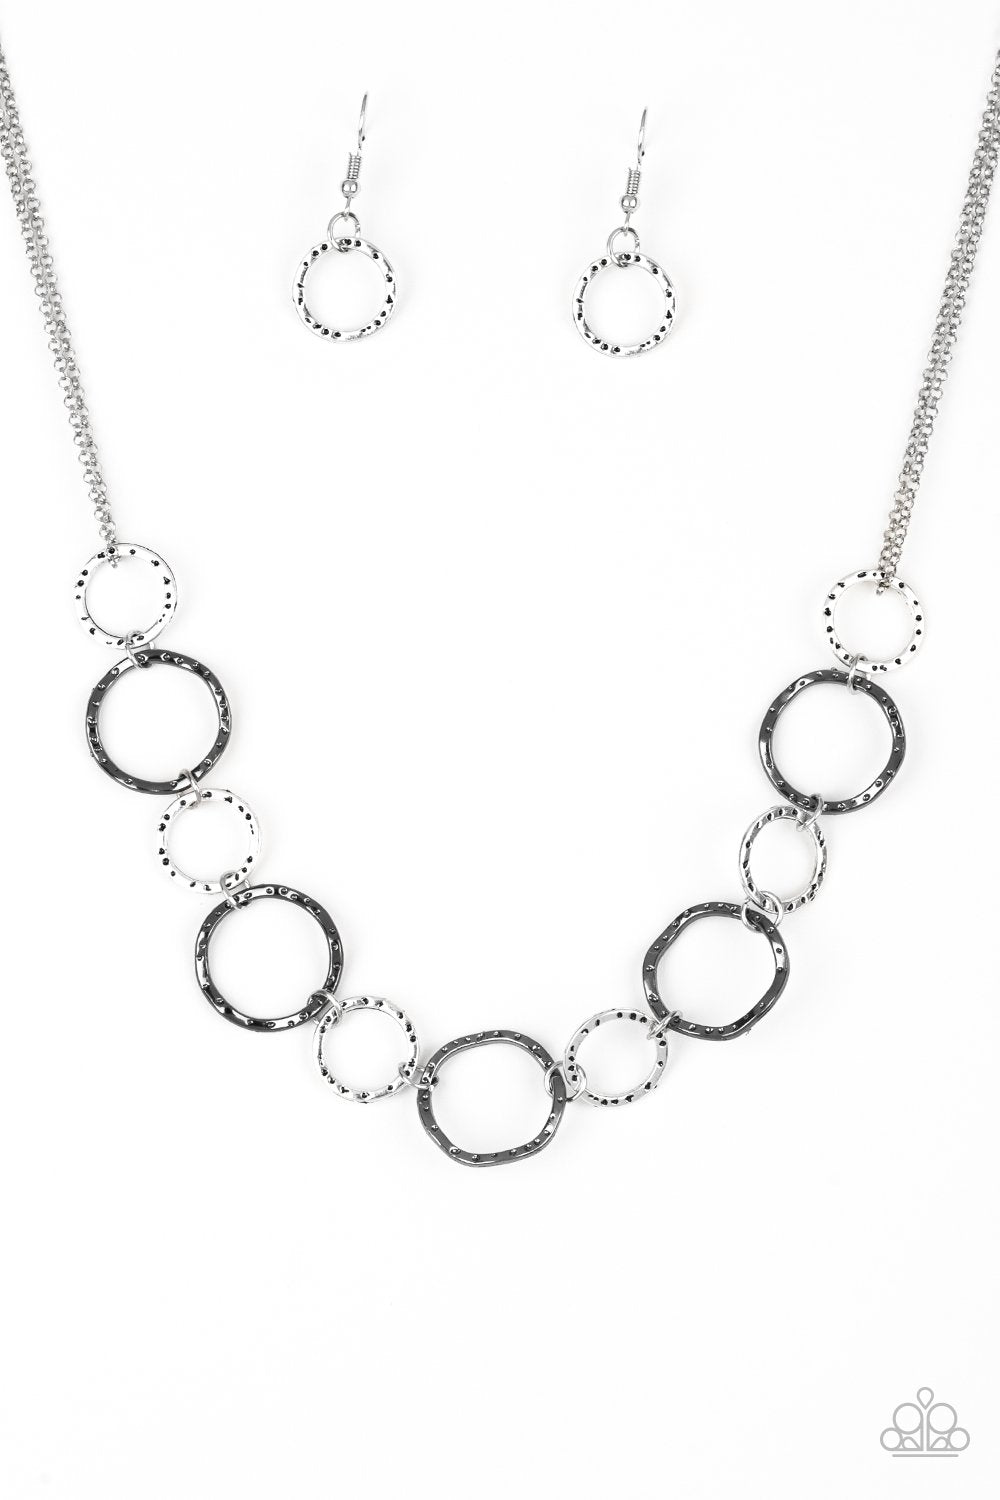 Circus Show Silver and Gunmetal Necklace - Paparazzi Accessories-CarasShop.com - $5 Jewelry by Cara Jewels